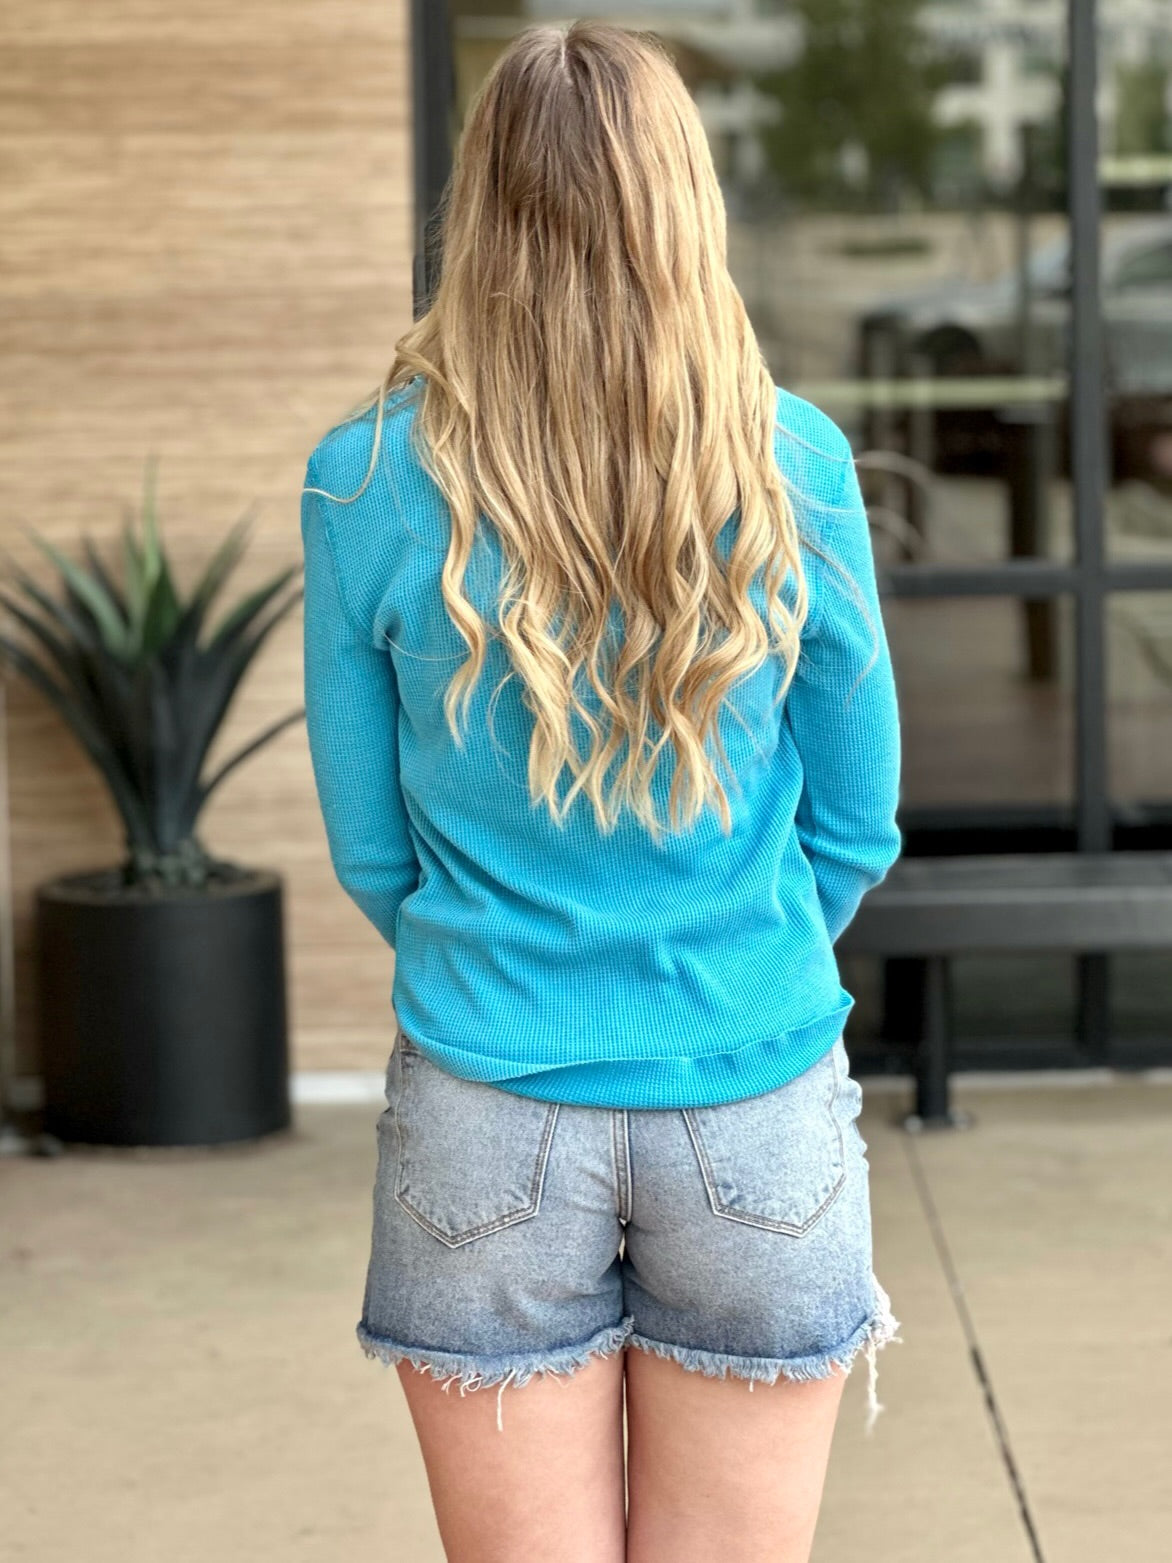 Lexi in turquoise henley back view